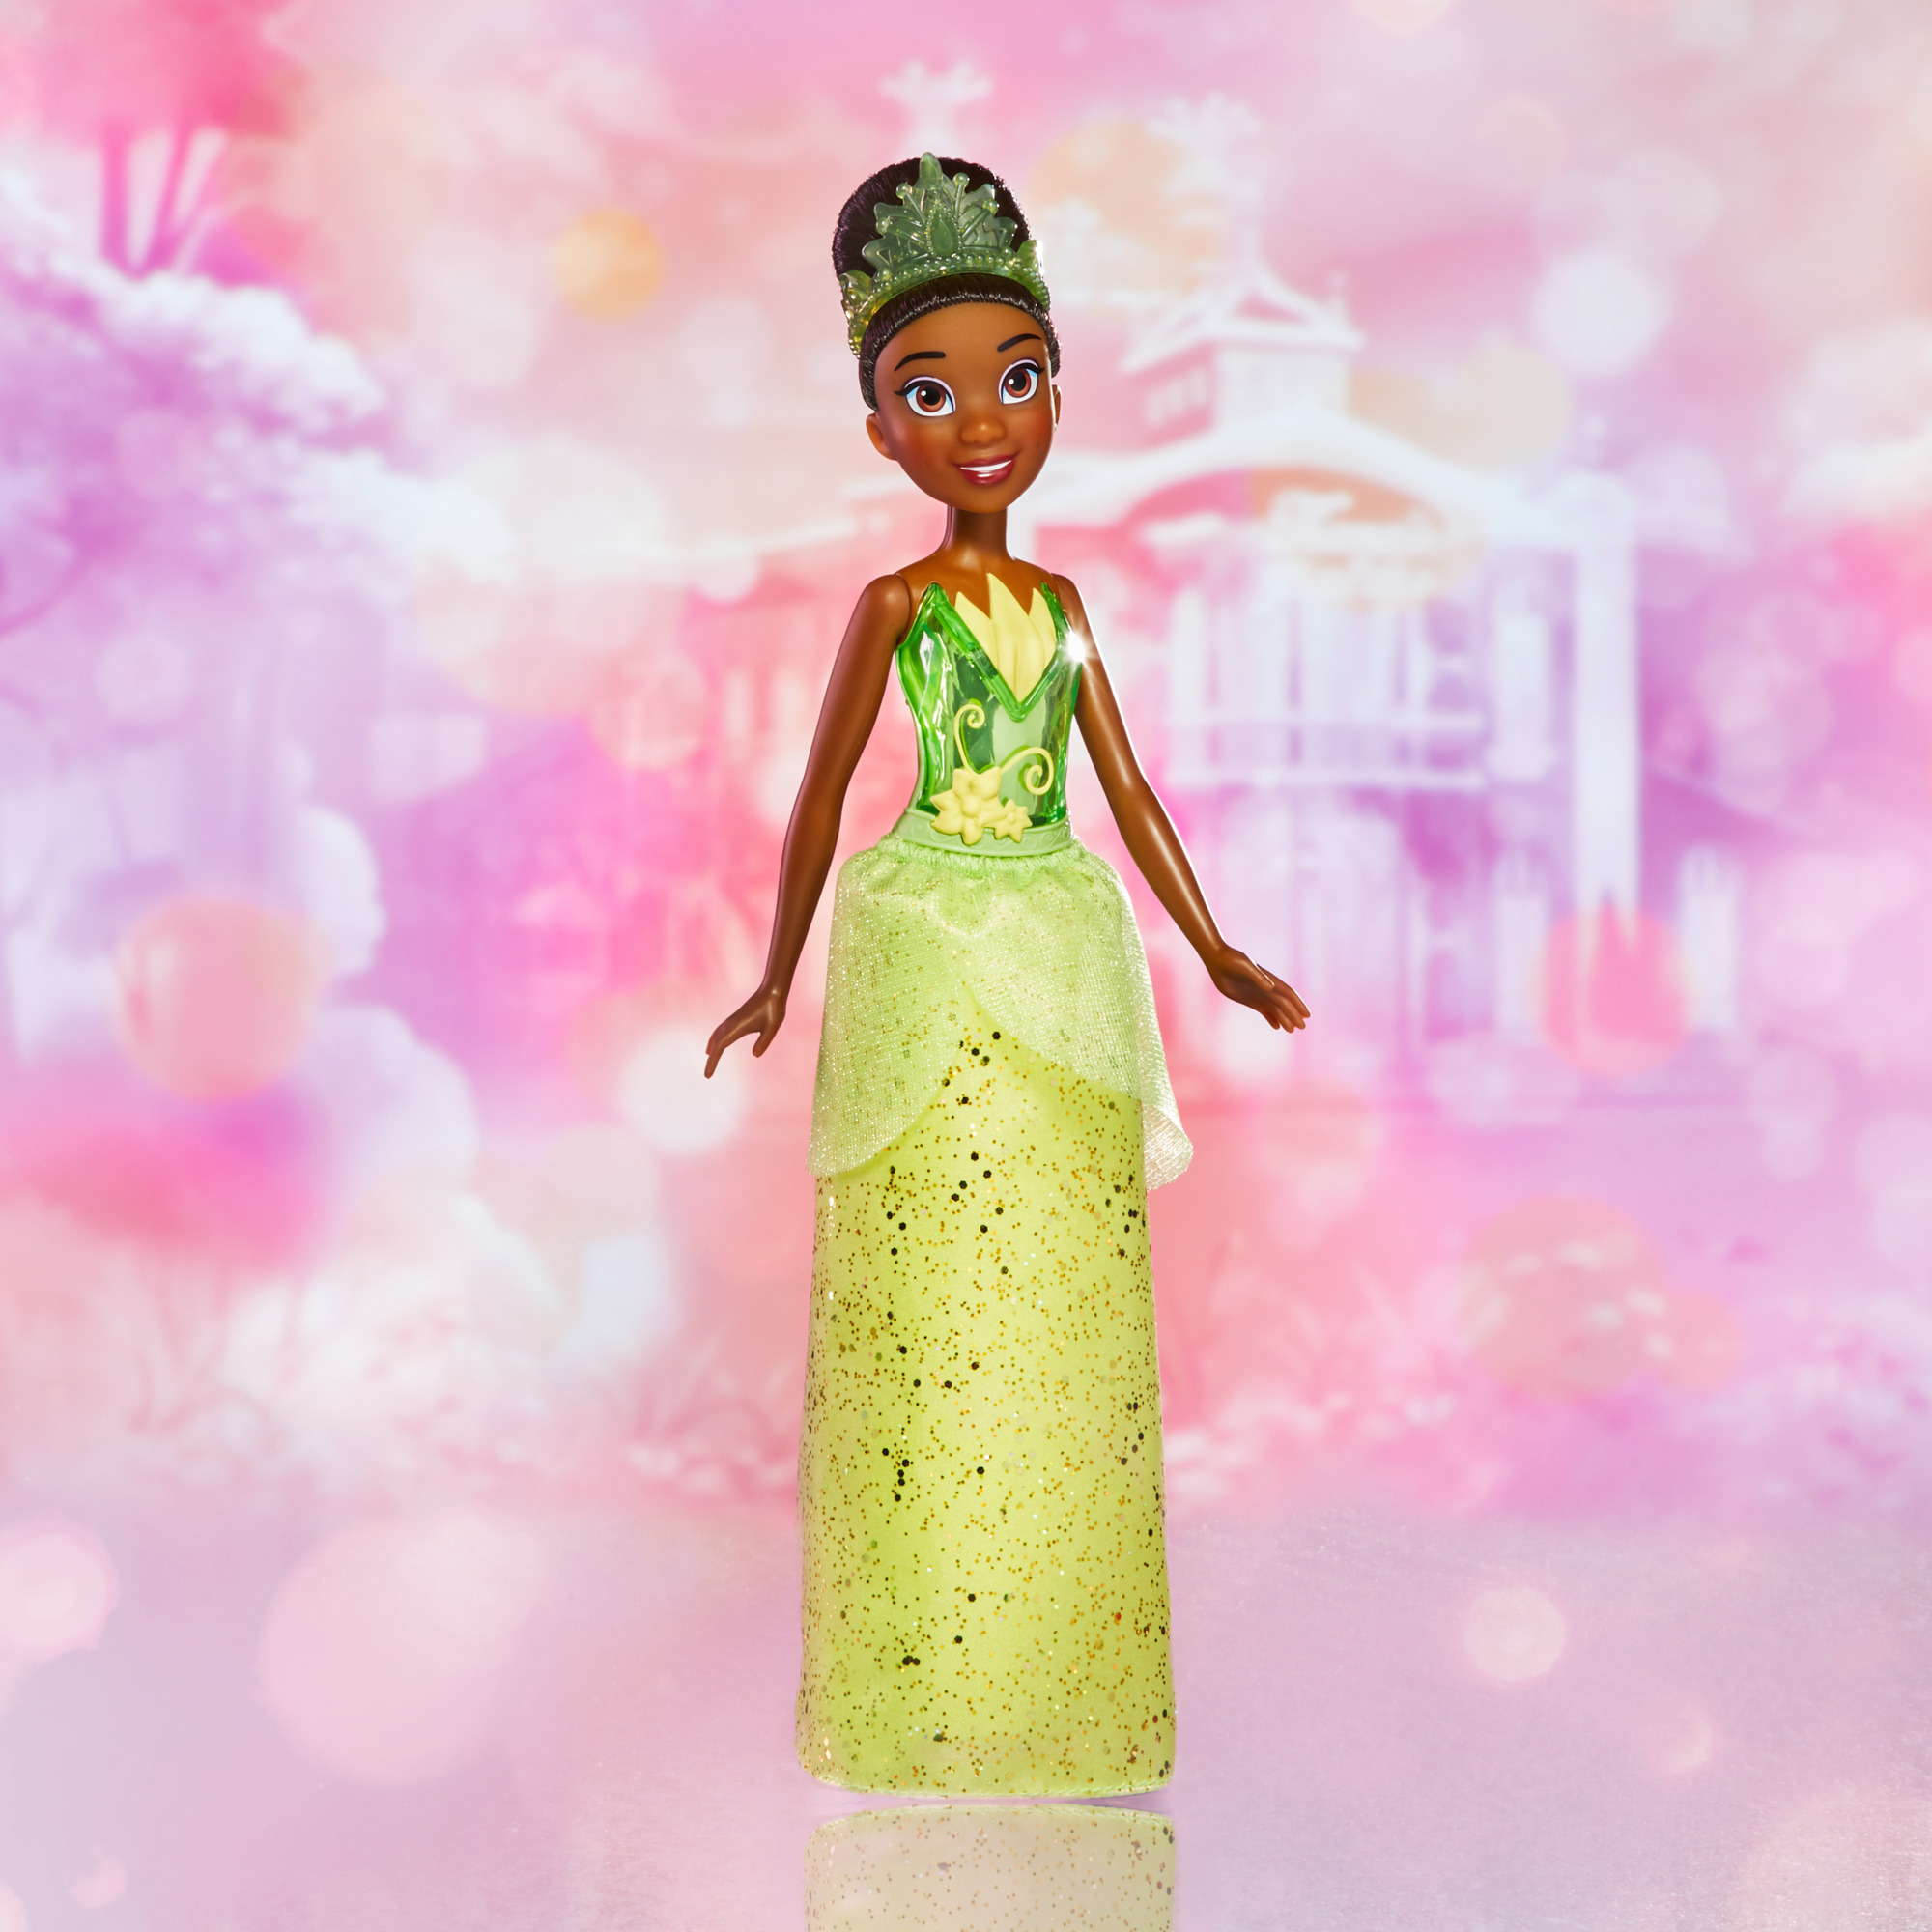 Disney Princess Royal Shimmer Tiana Fashion Doll, Accessories Included - image 6 of 9